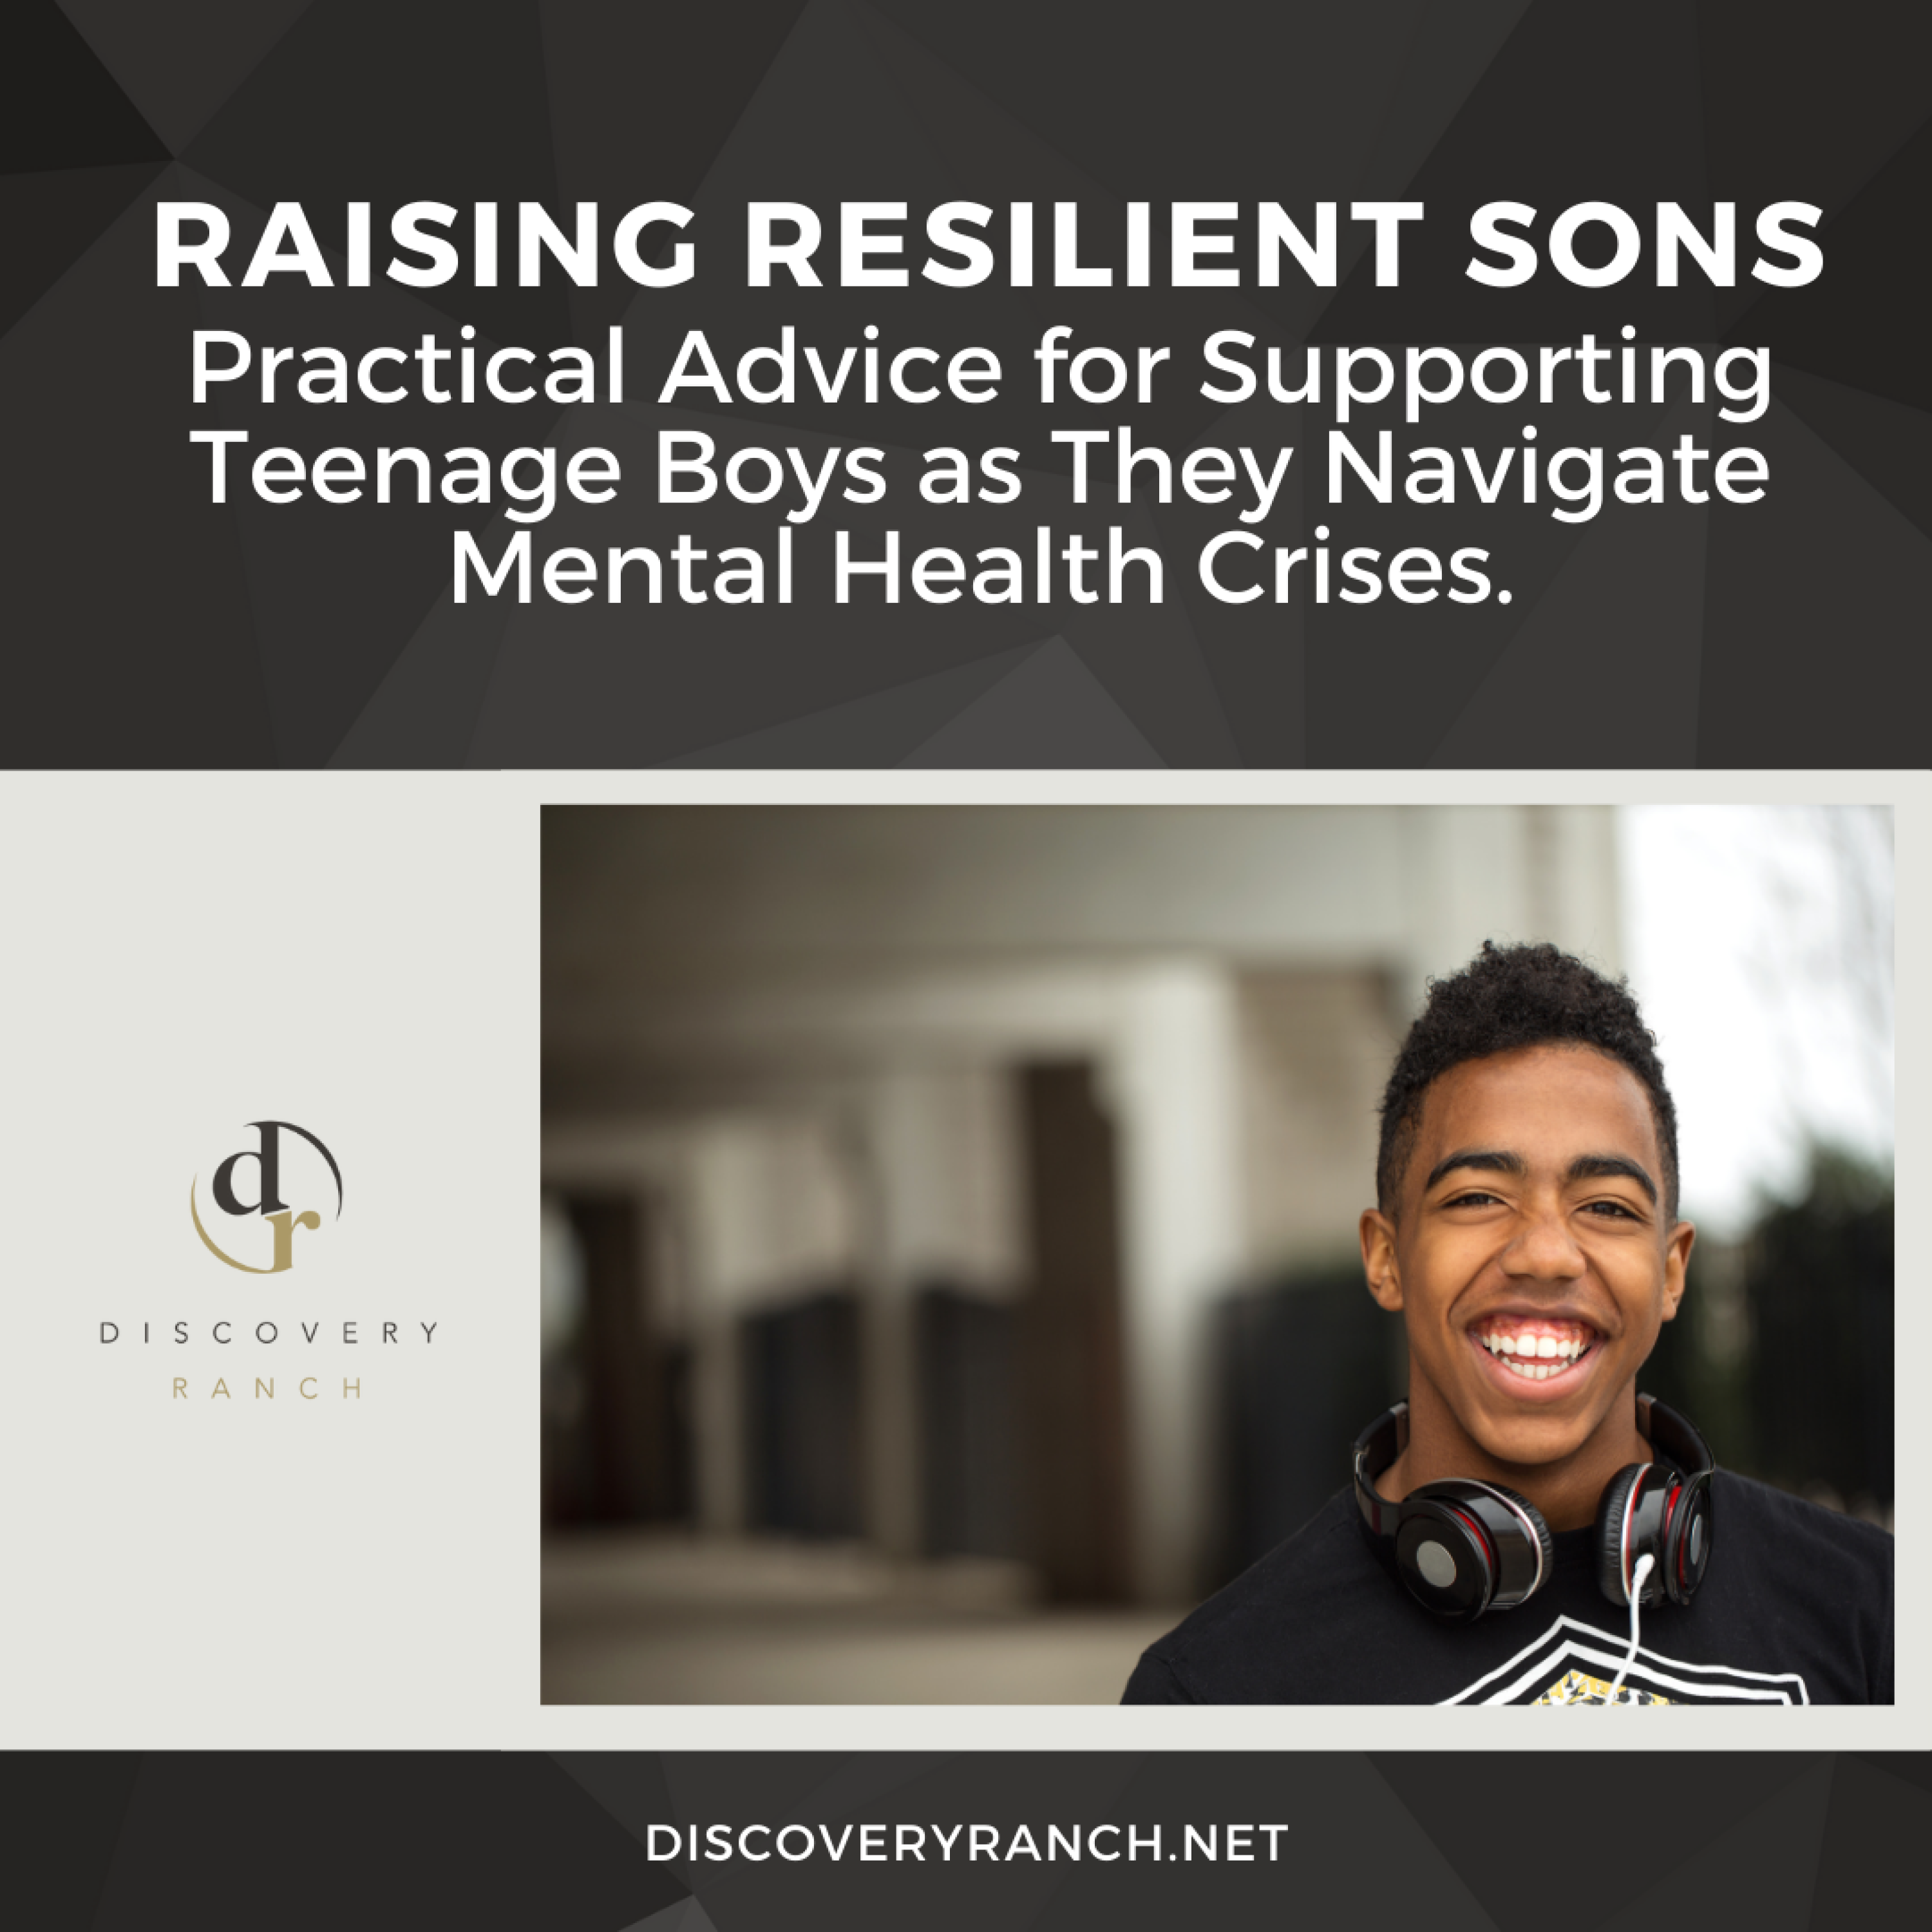 Raising Resilient Sons: Practical Advice for Supporting Teenage Boys as They Navigate Mental Health Crises Image